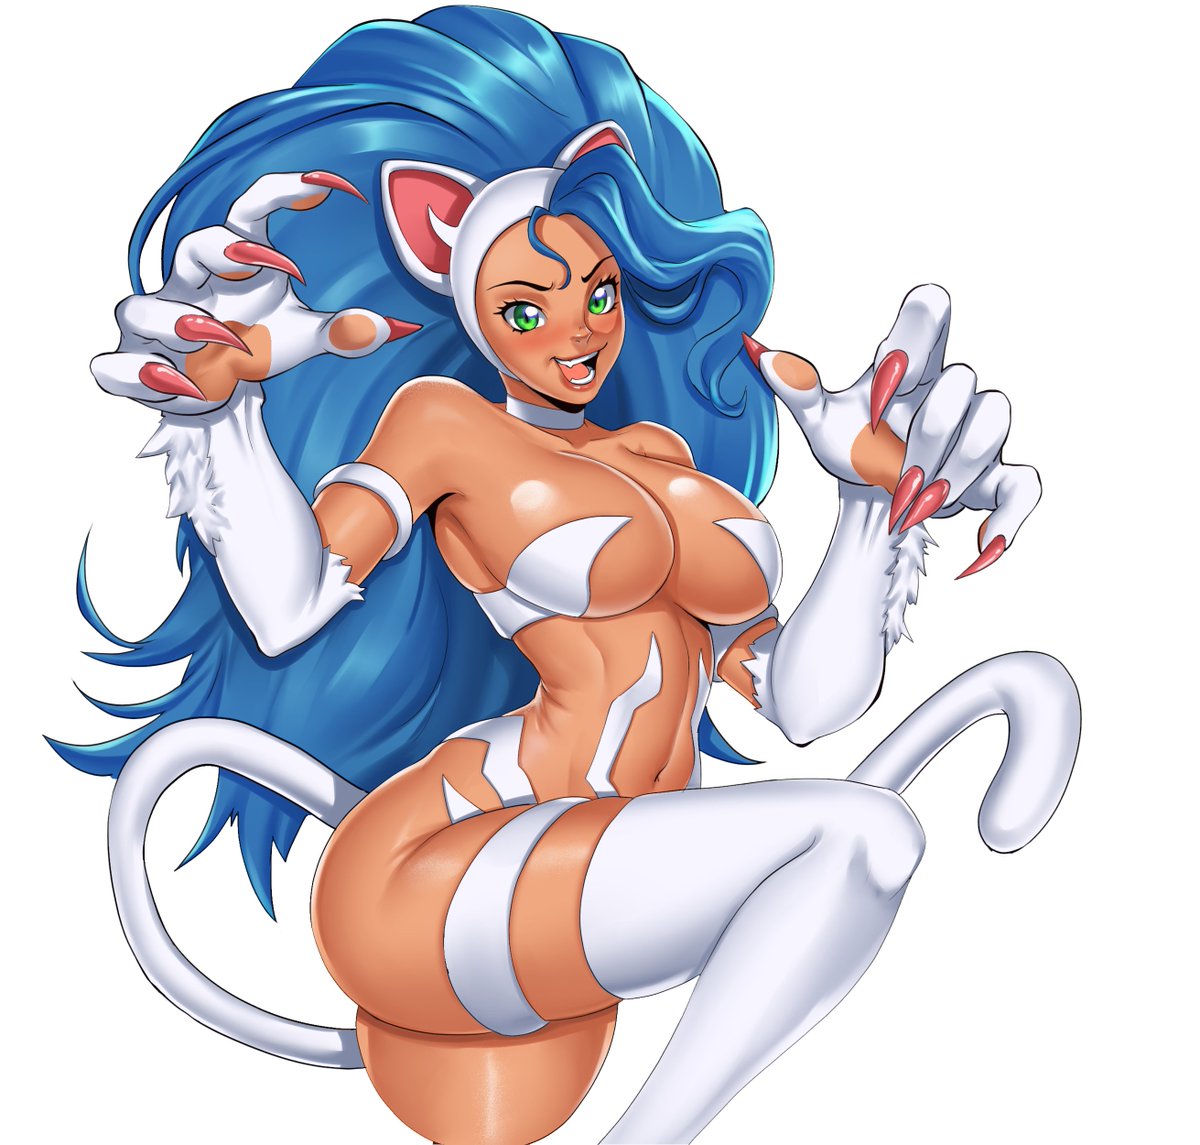 Commission Done Felicia from darkstalkers #commissionsopen #opencommissions